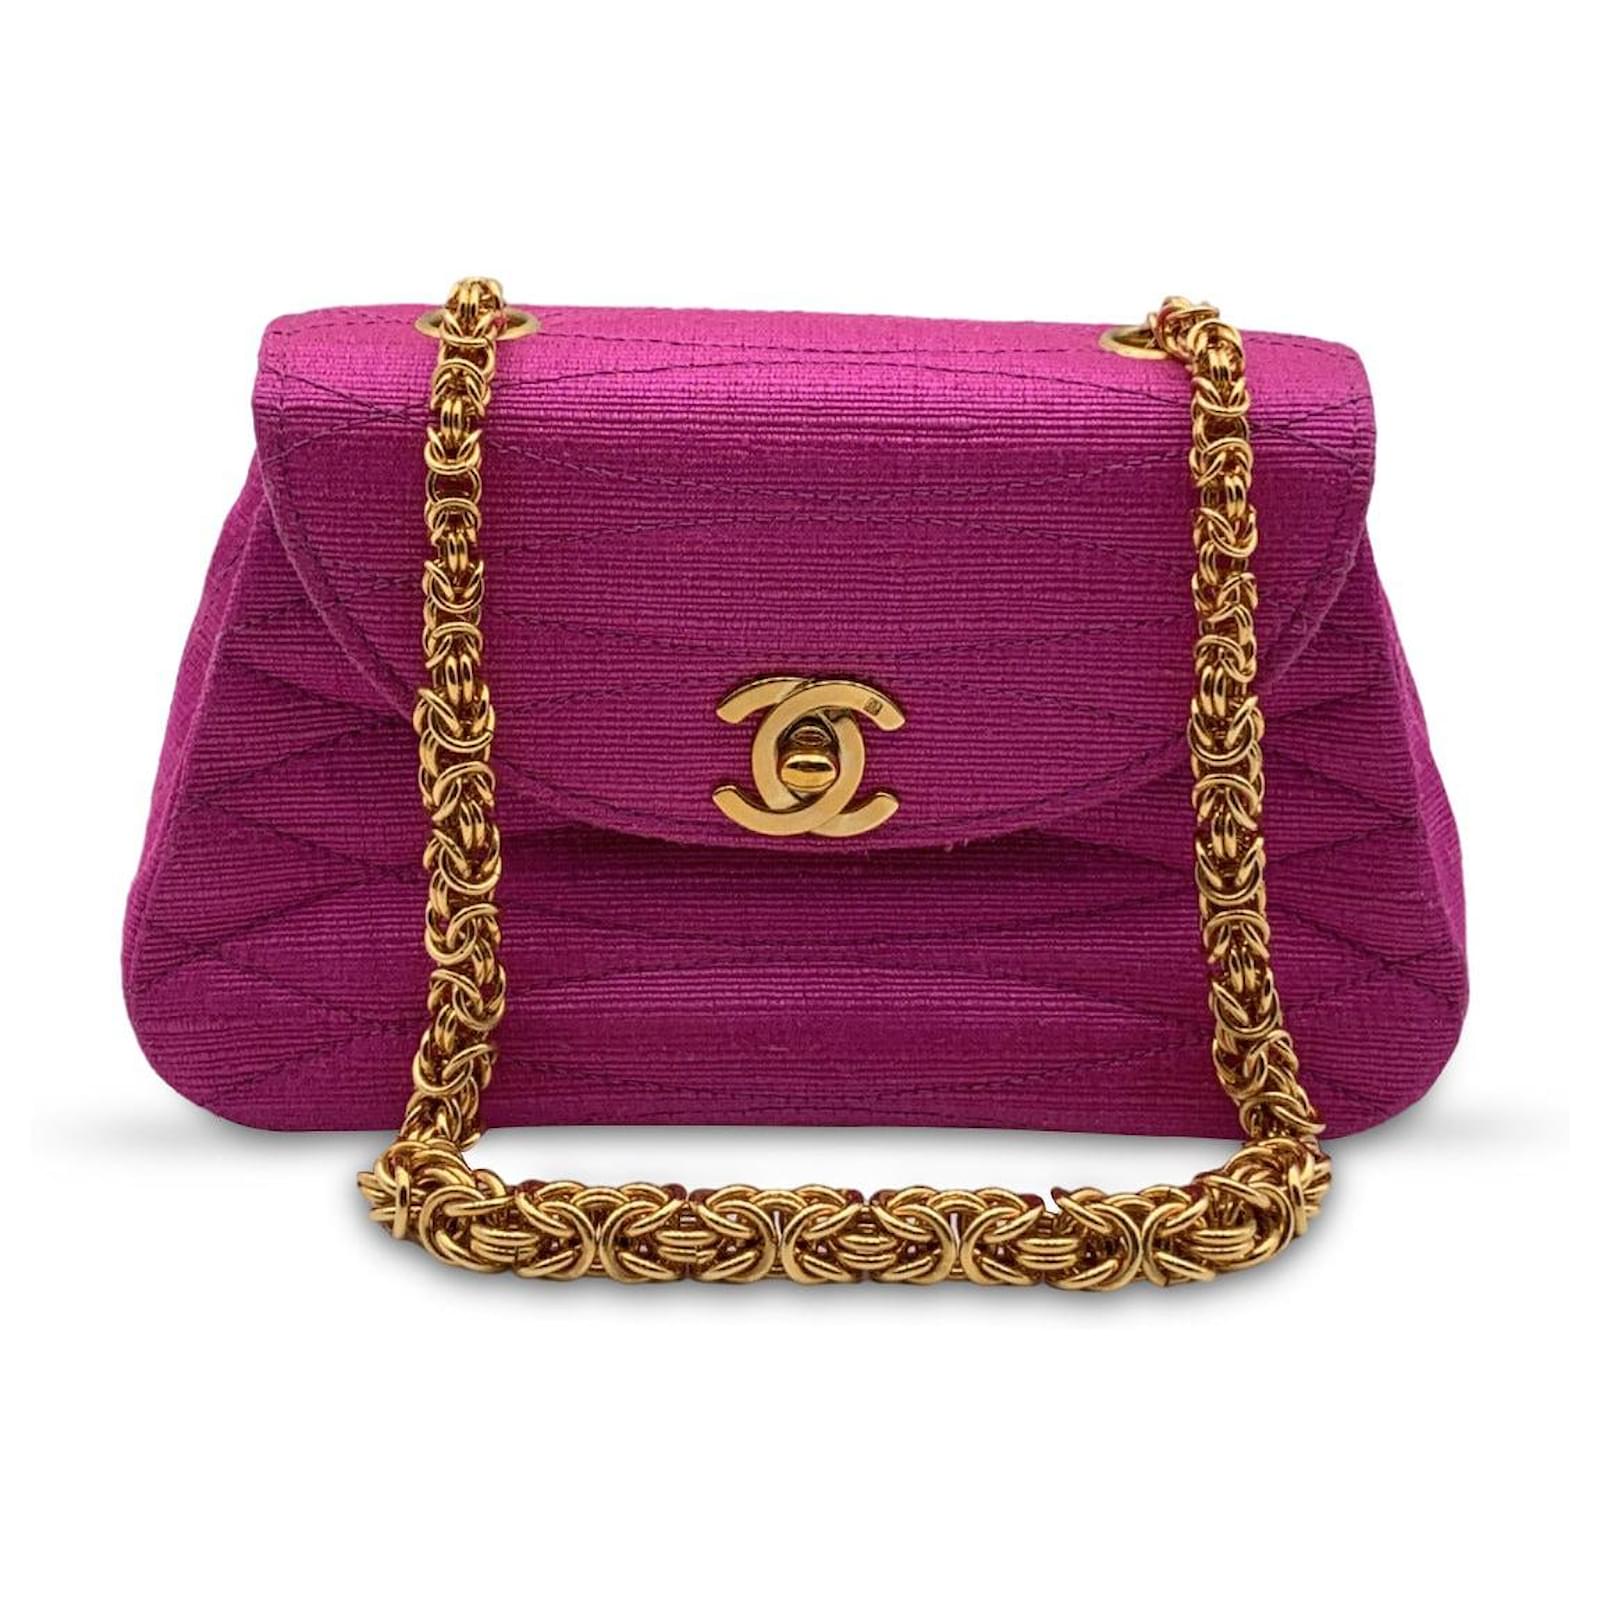 This Could Be Chanel's Prettiest Pink Tote Yet This Season